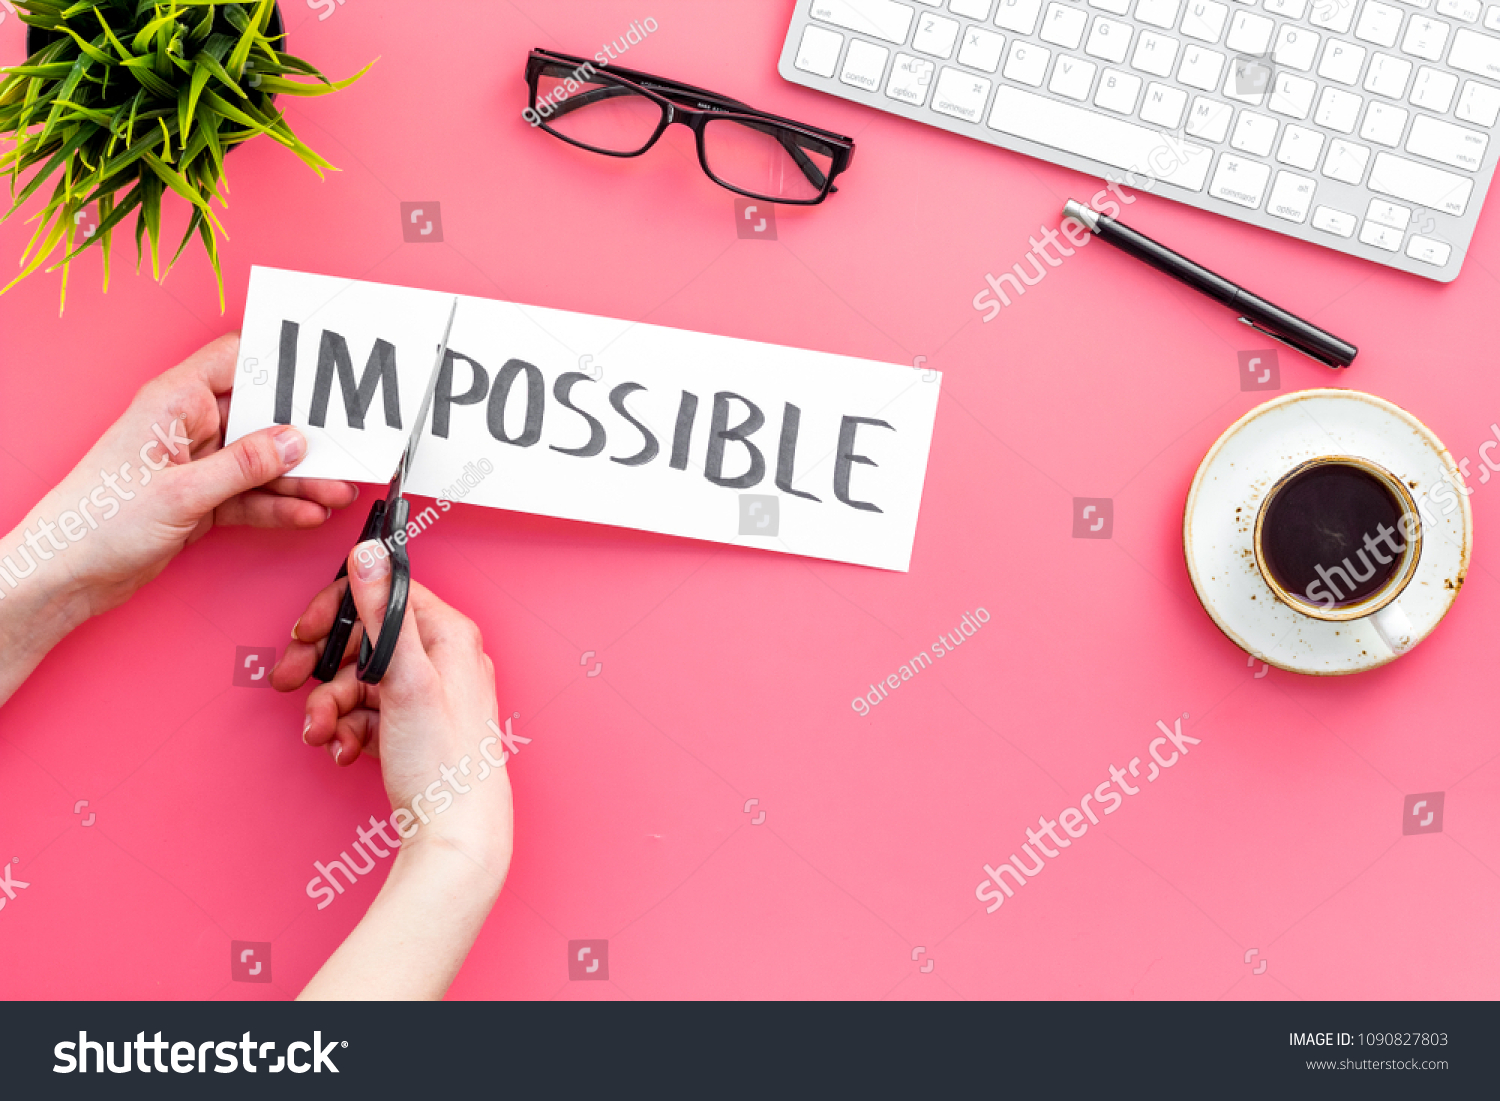 All is possible concept. Cutting the part im of written word impossible by sciccors. Pink background top view copy space #1090827803